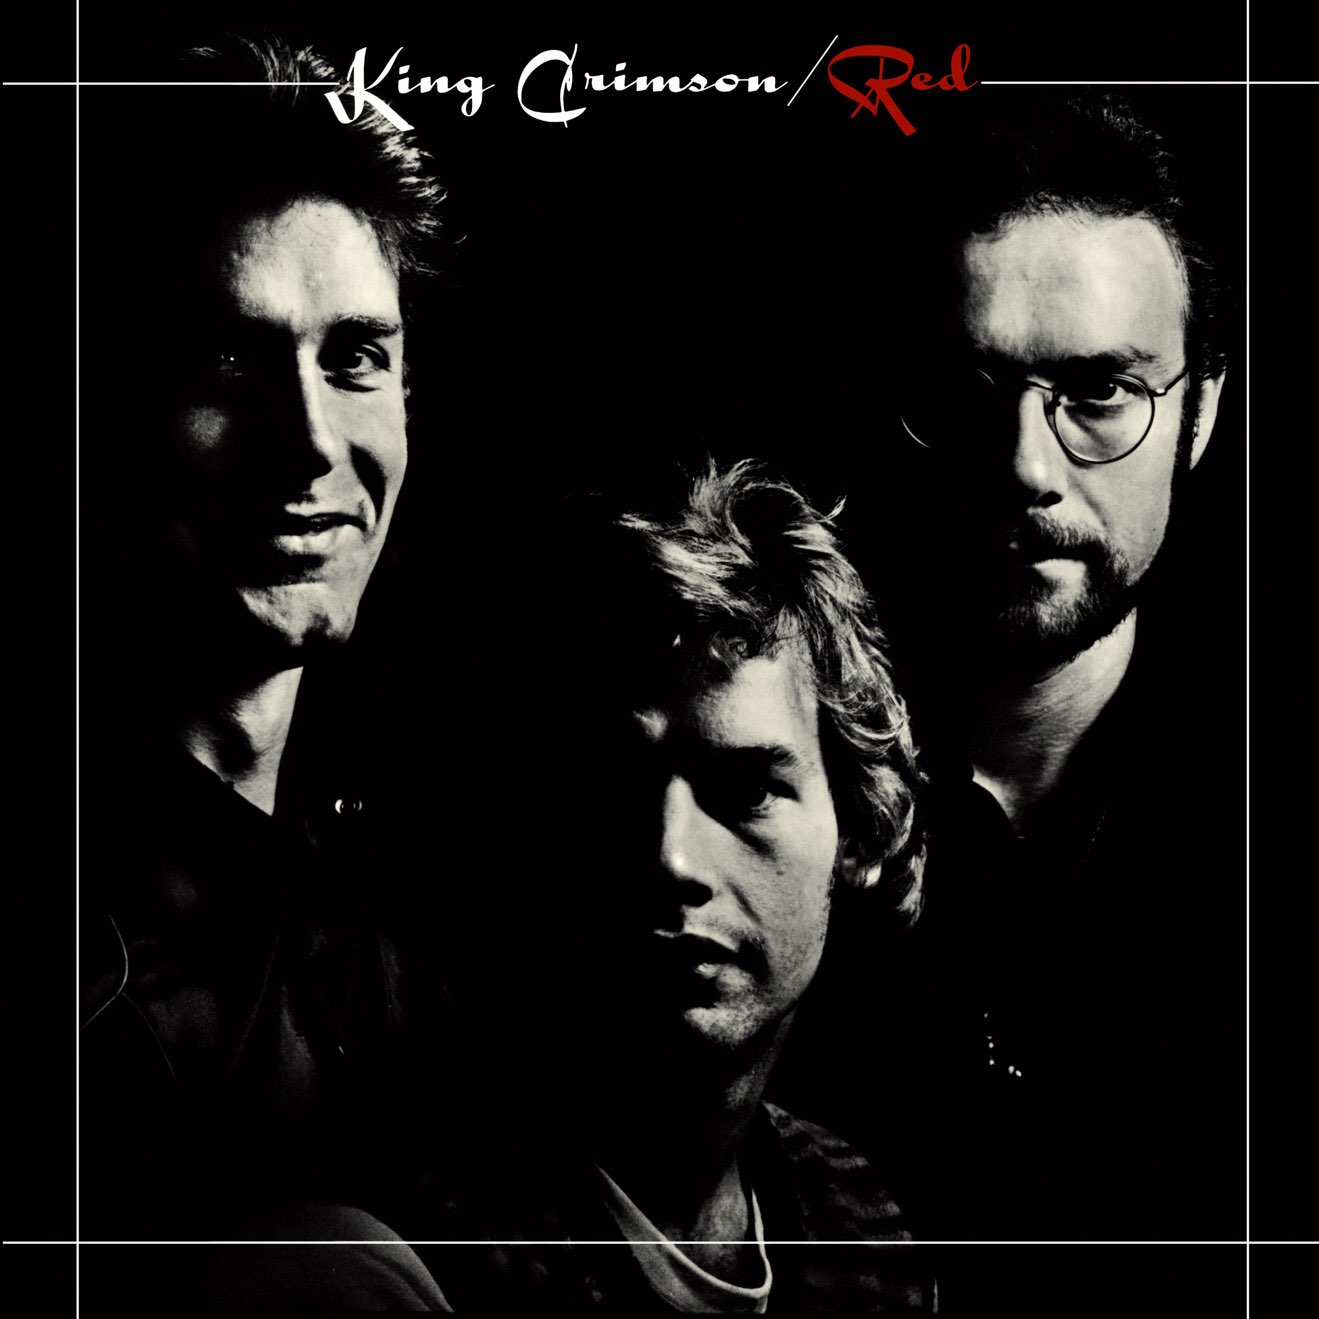 King Crimson – Red (Expanded Edition) (2014) [iTunes Match M4A]